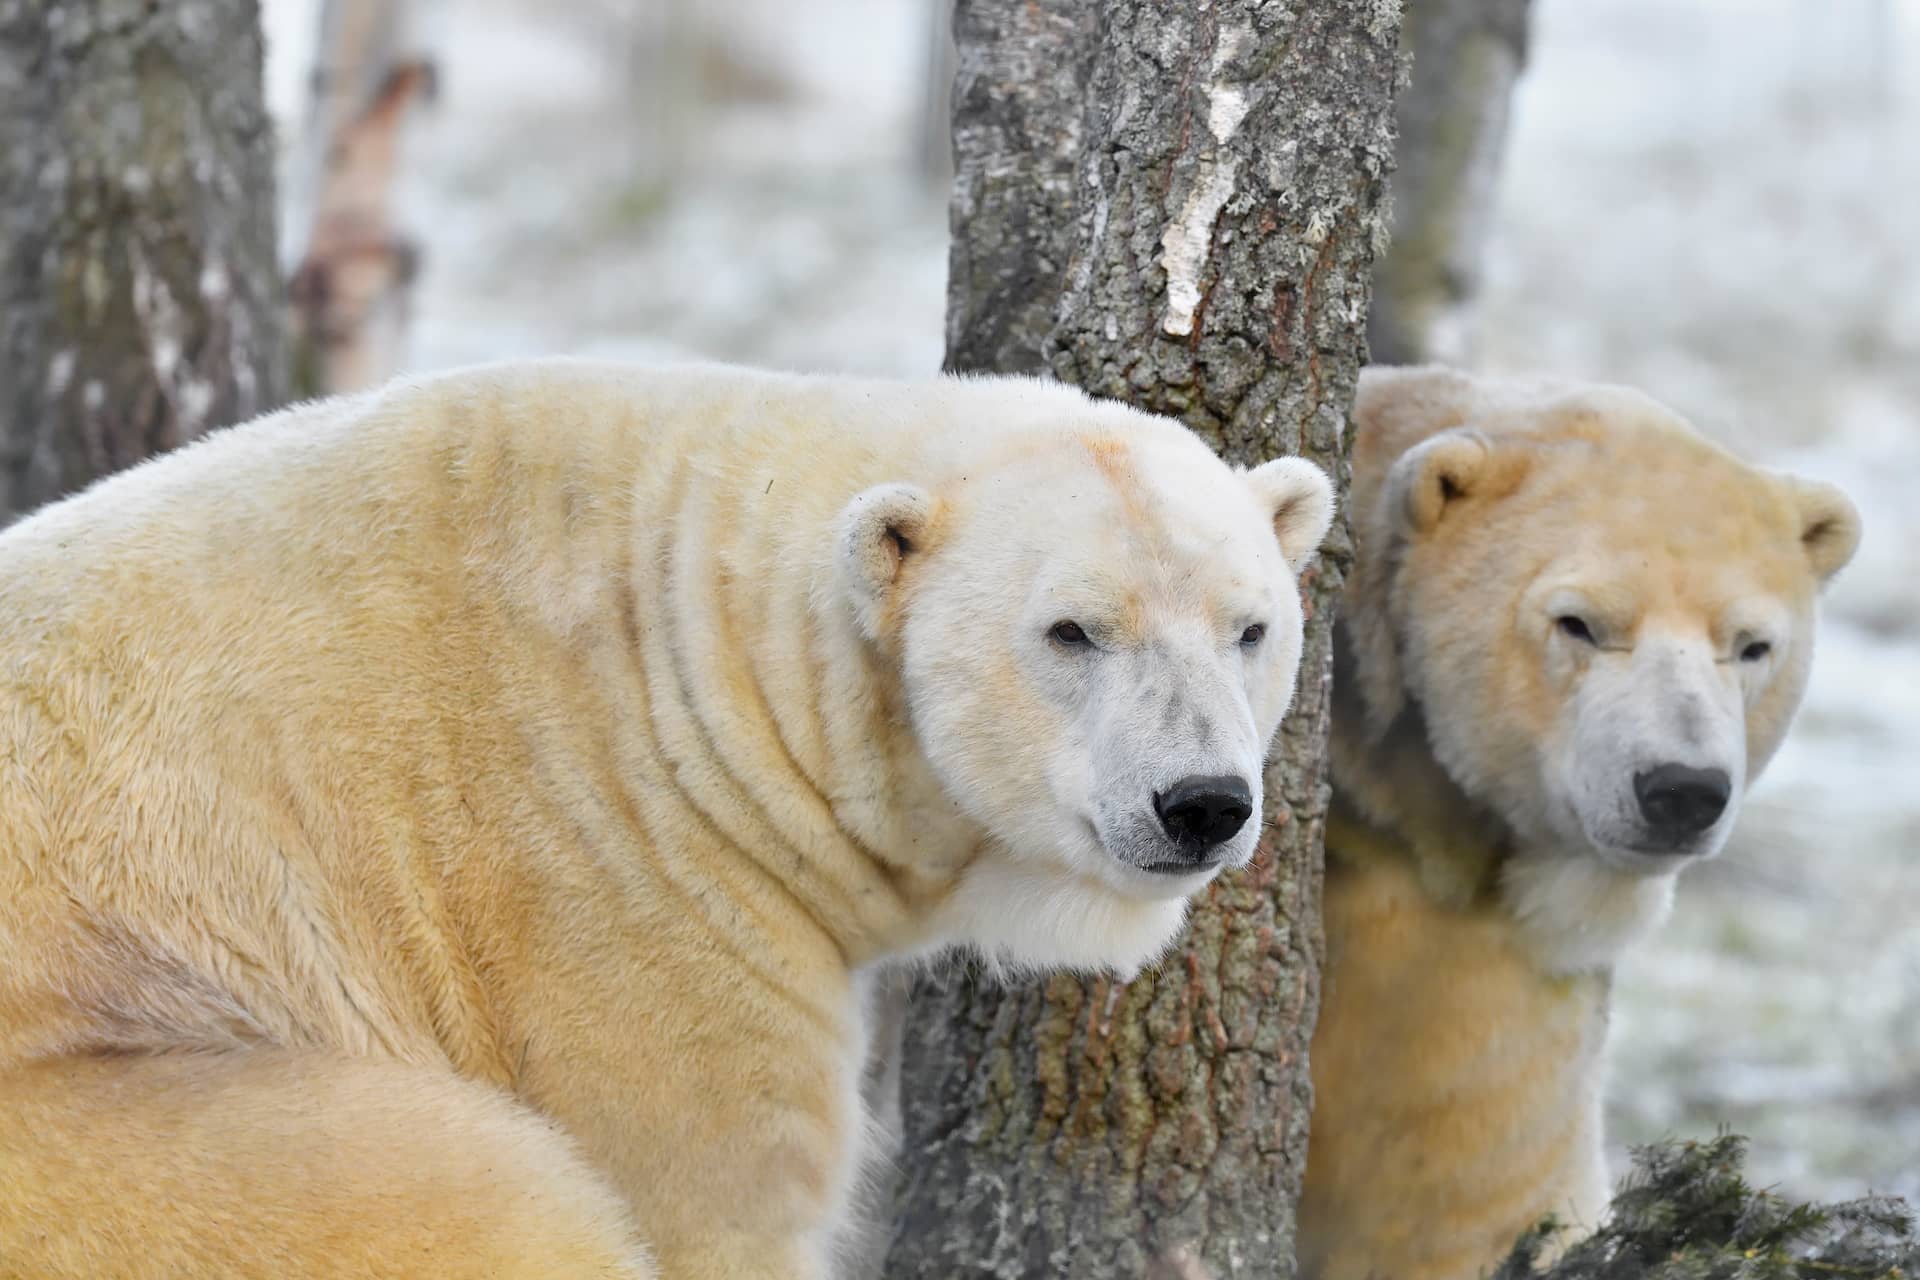 Two polar bears sitting in the snow next to a tree looking to the right IMAGE: Laura Moore 2020